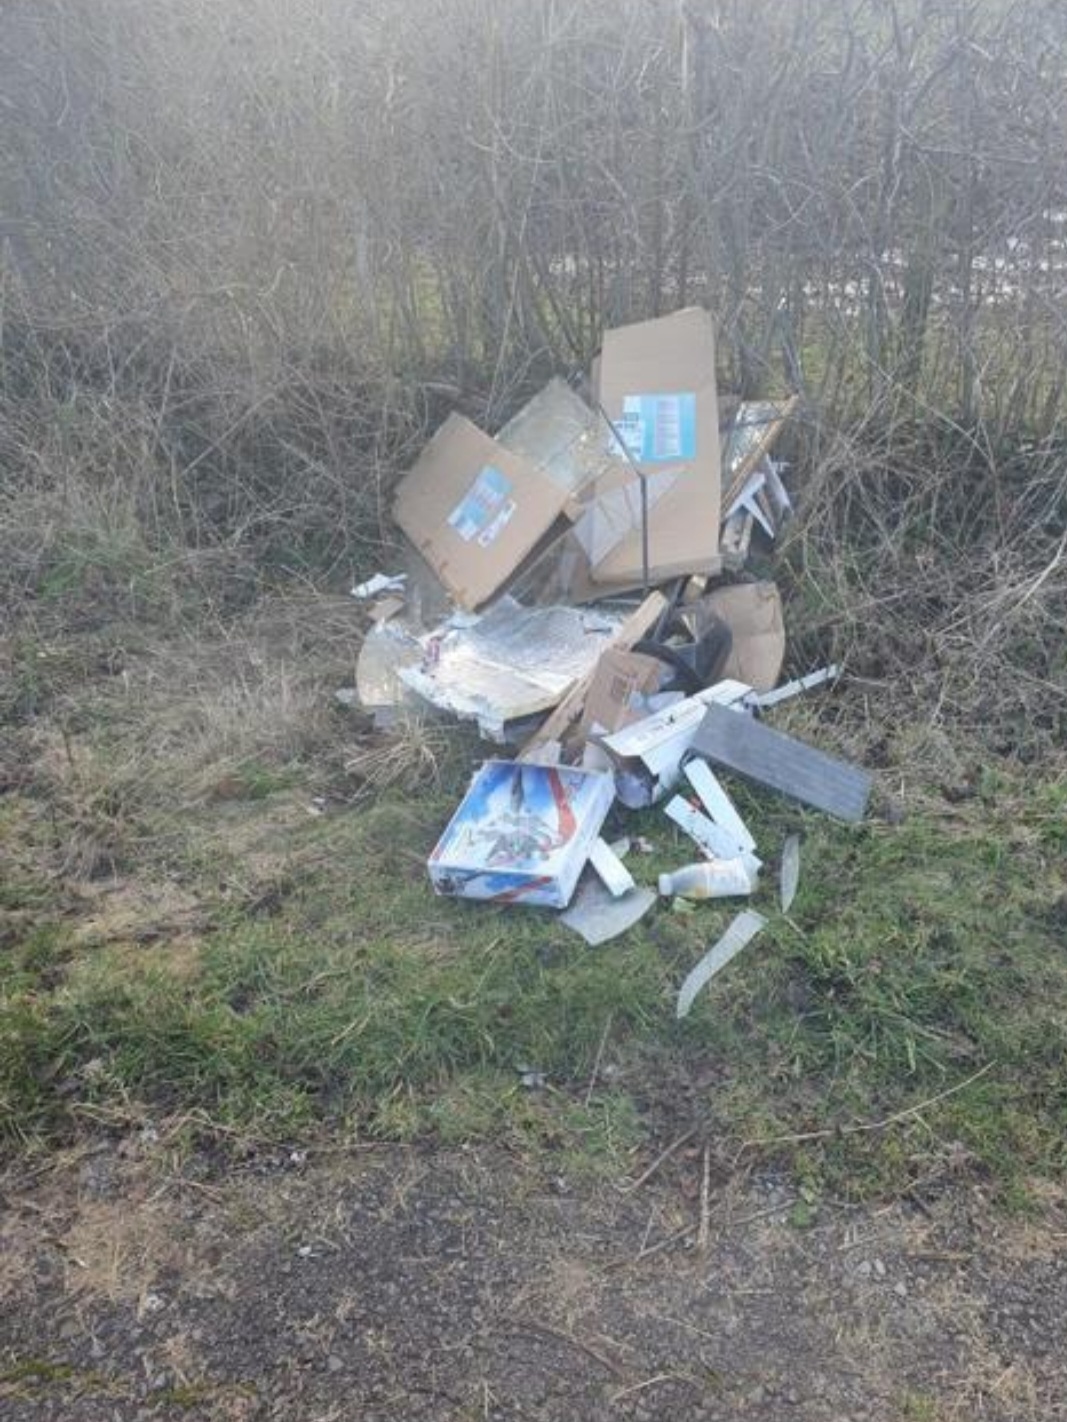 Cllr Chris Evans is also calling on the council to be more proactive by searching fly-tipped waste for evidence revealing who the rubbish belonged to so heavy fines can be issued..